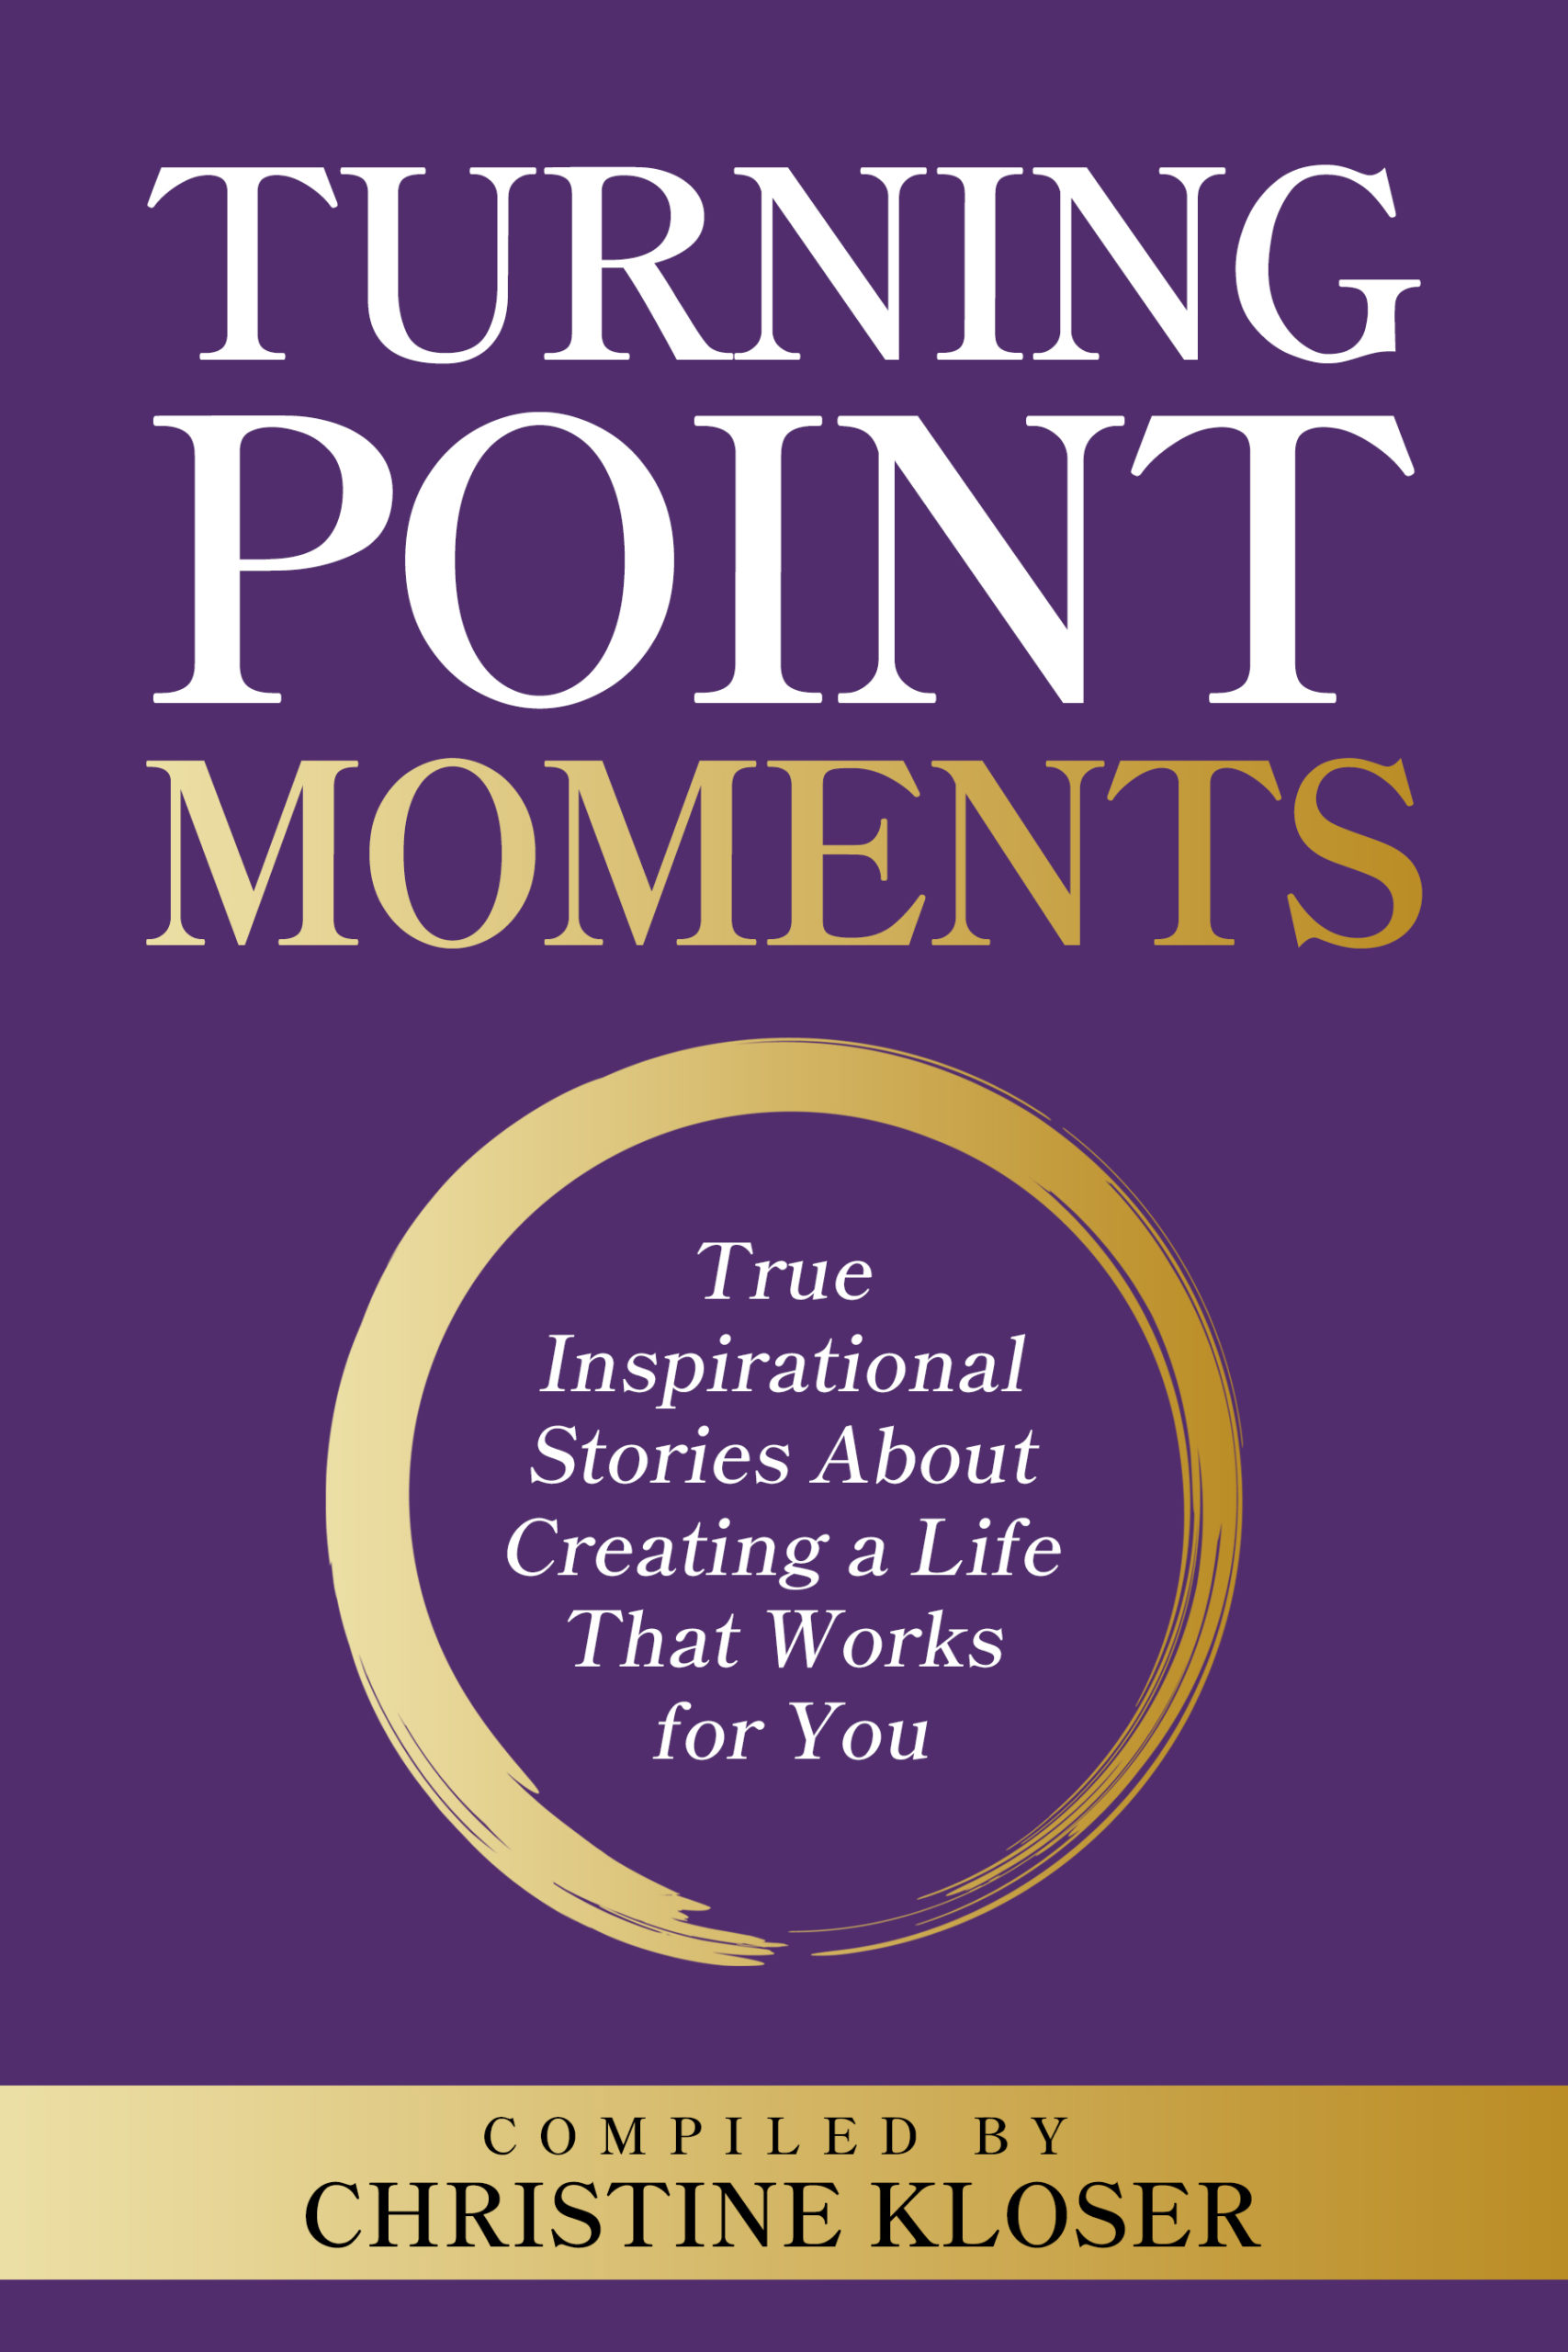 “Turning Point Moments”